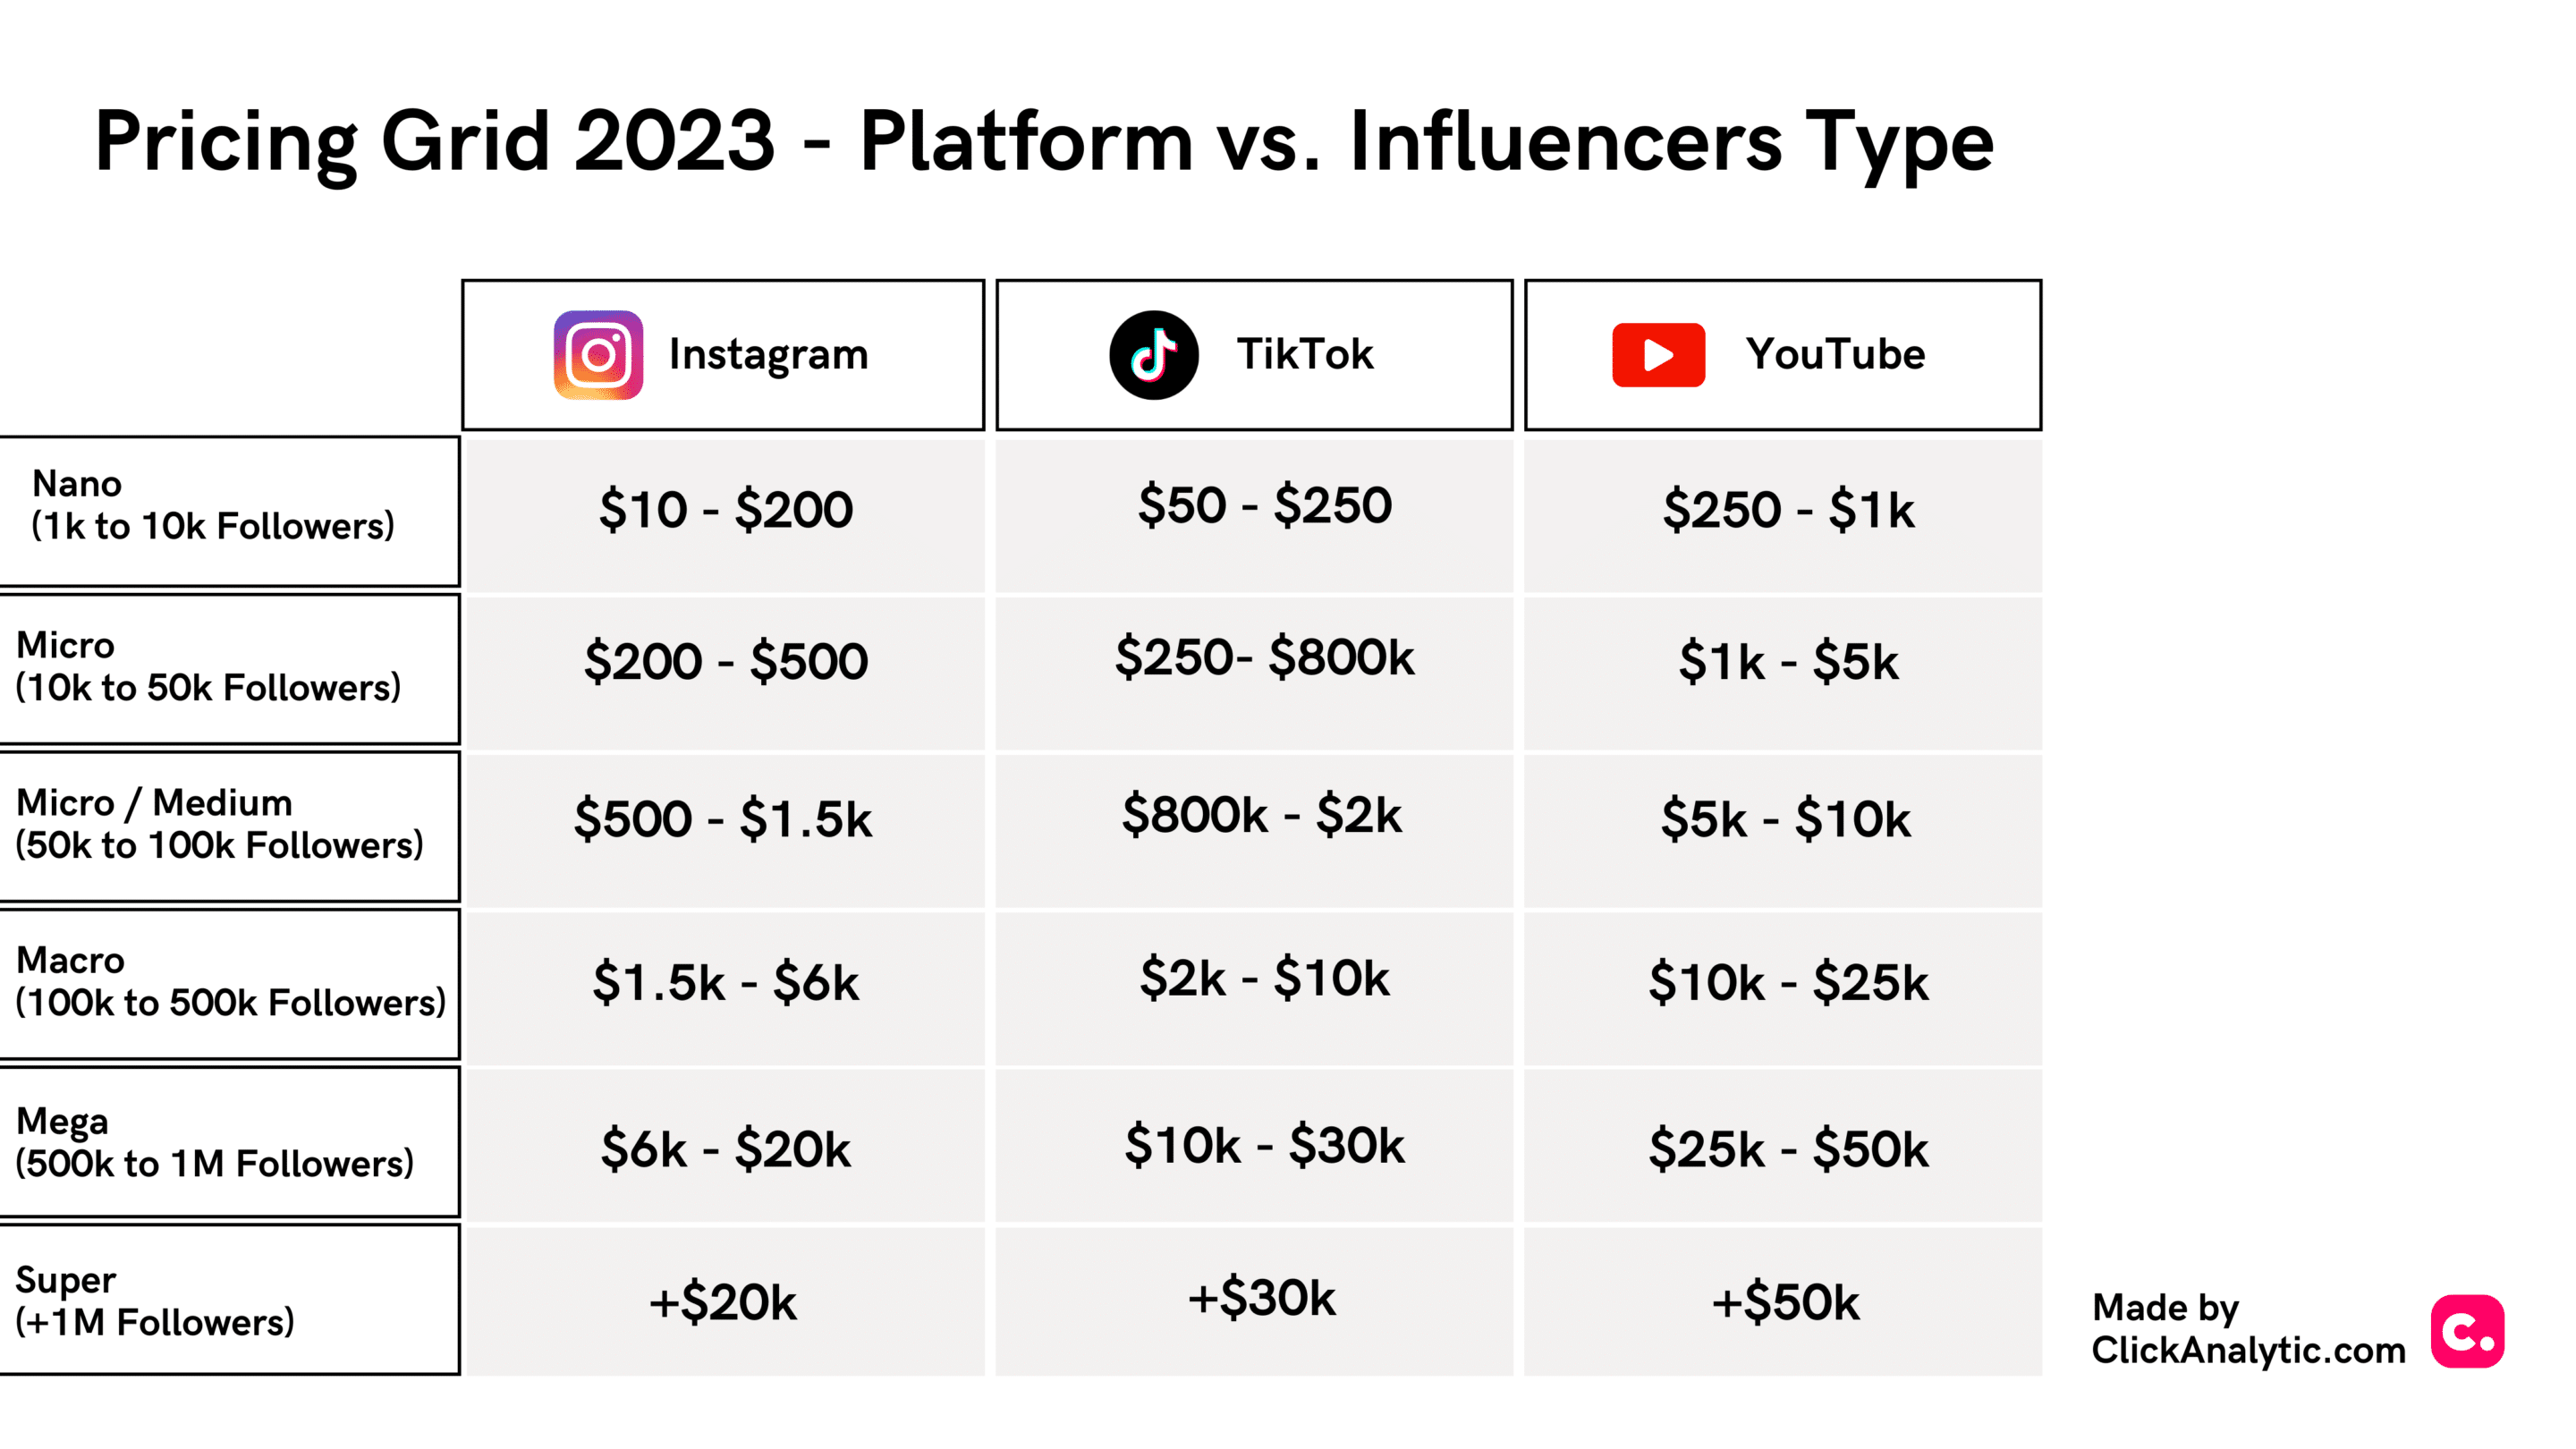 Pricing grid 2023 vs influencers type.